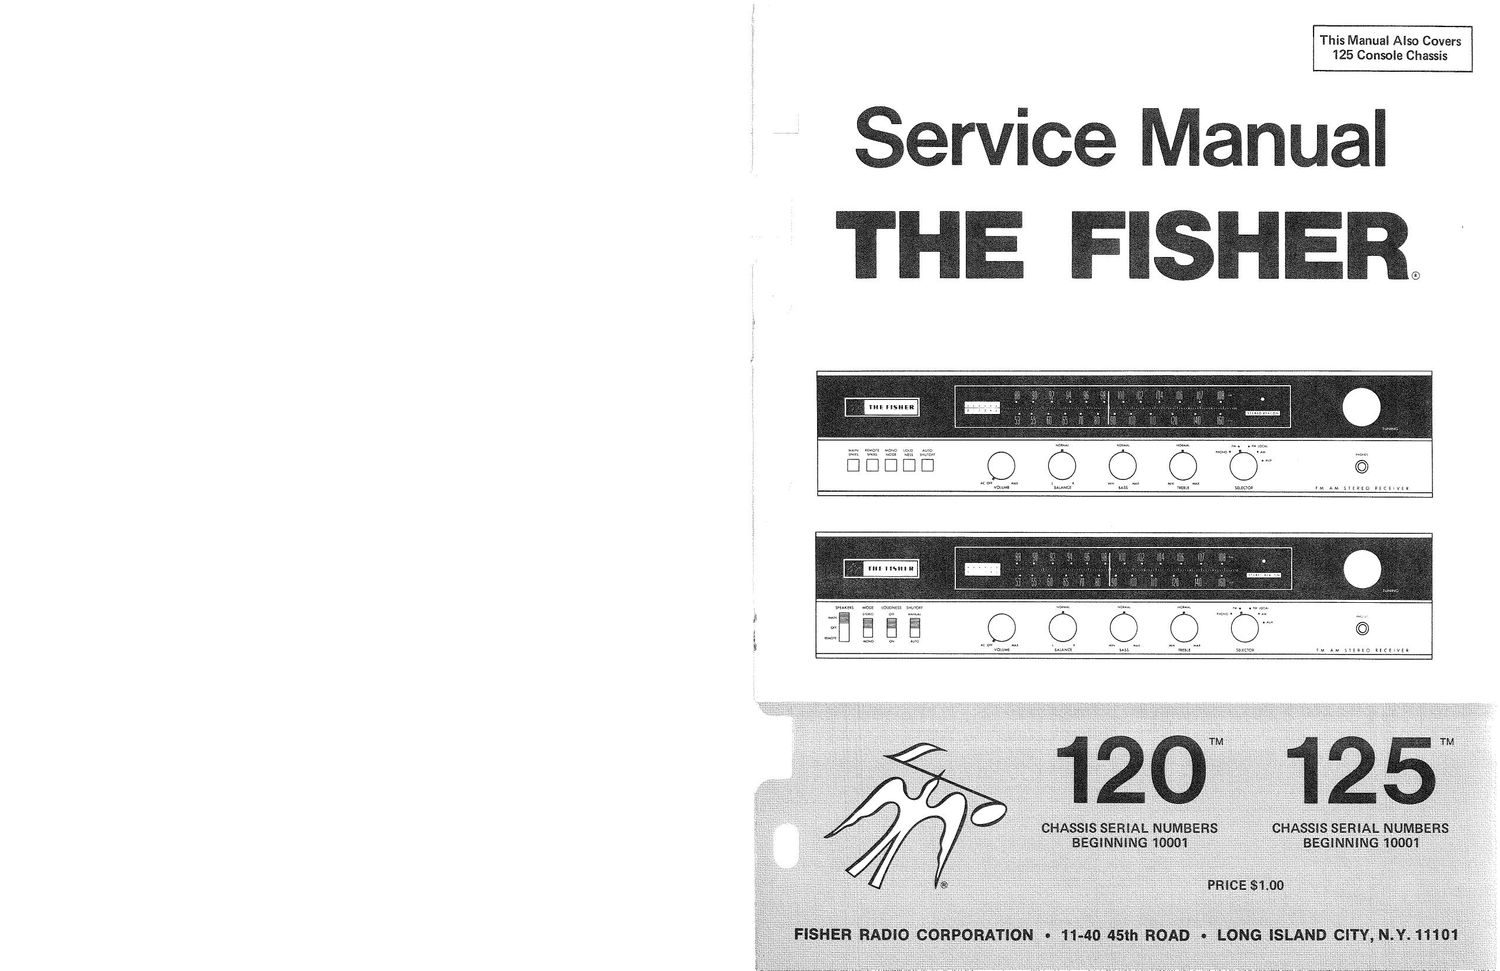 Fisher 125 Service Manual